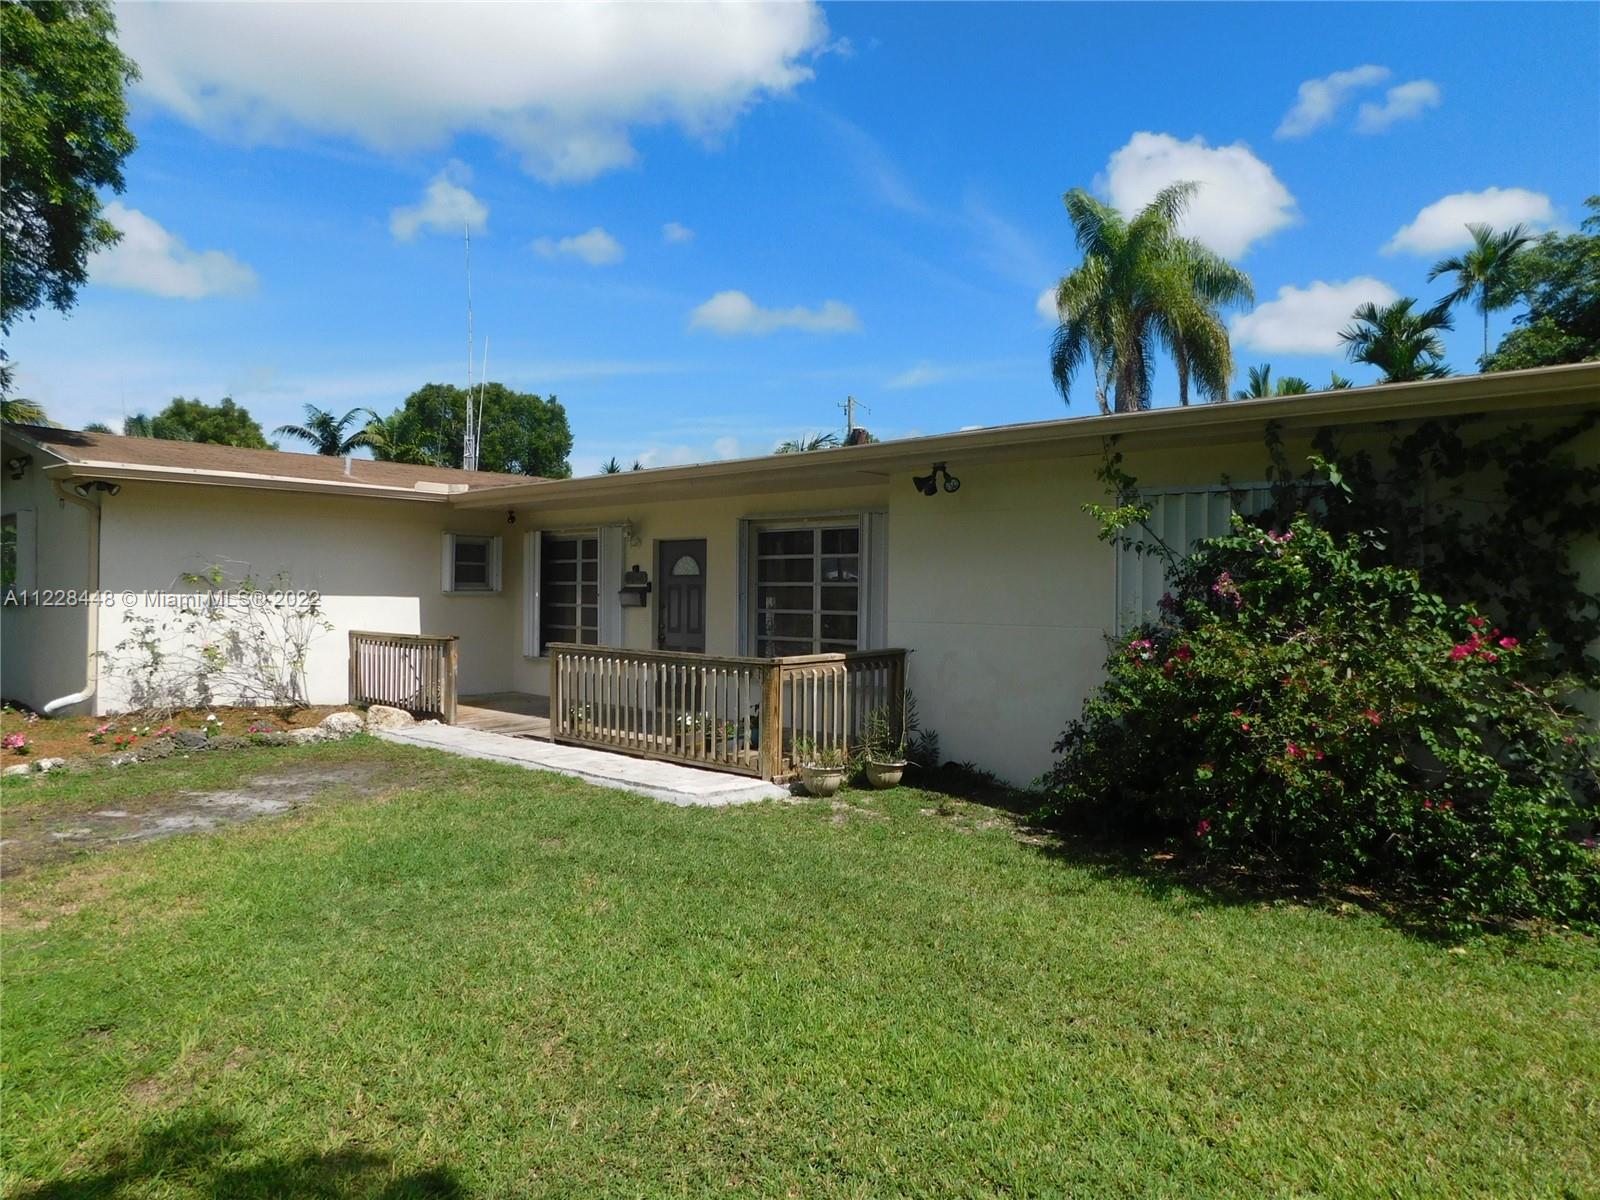 Photo 8 of 8060 90th Ter in Miami - MLS A11228448